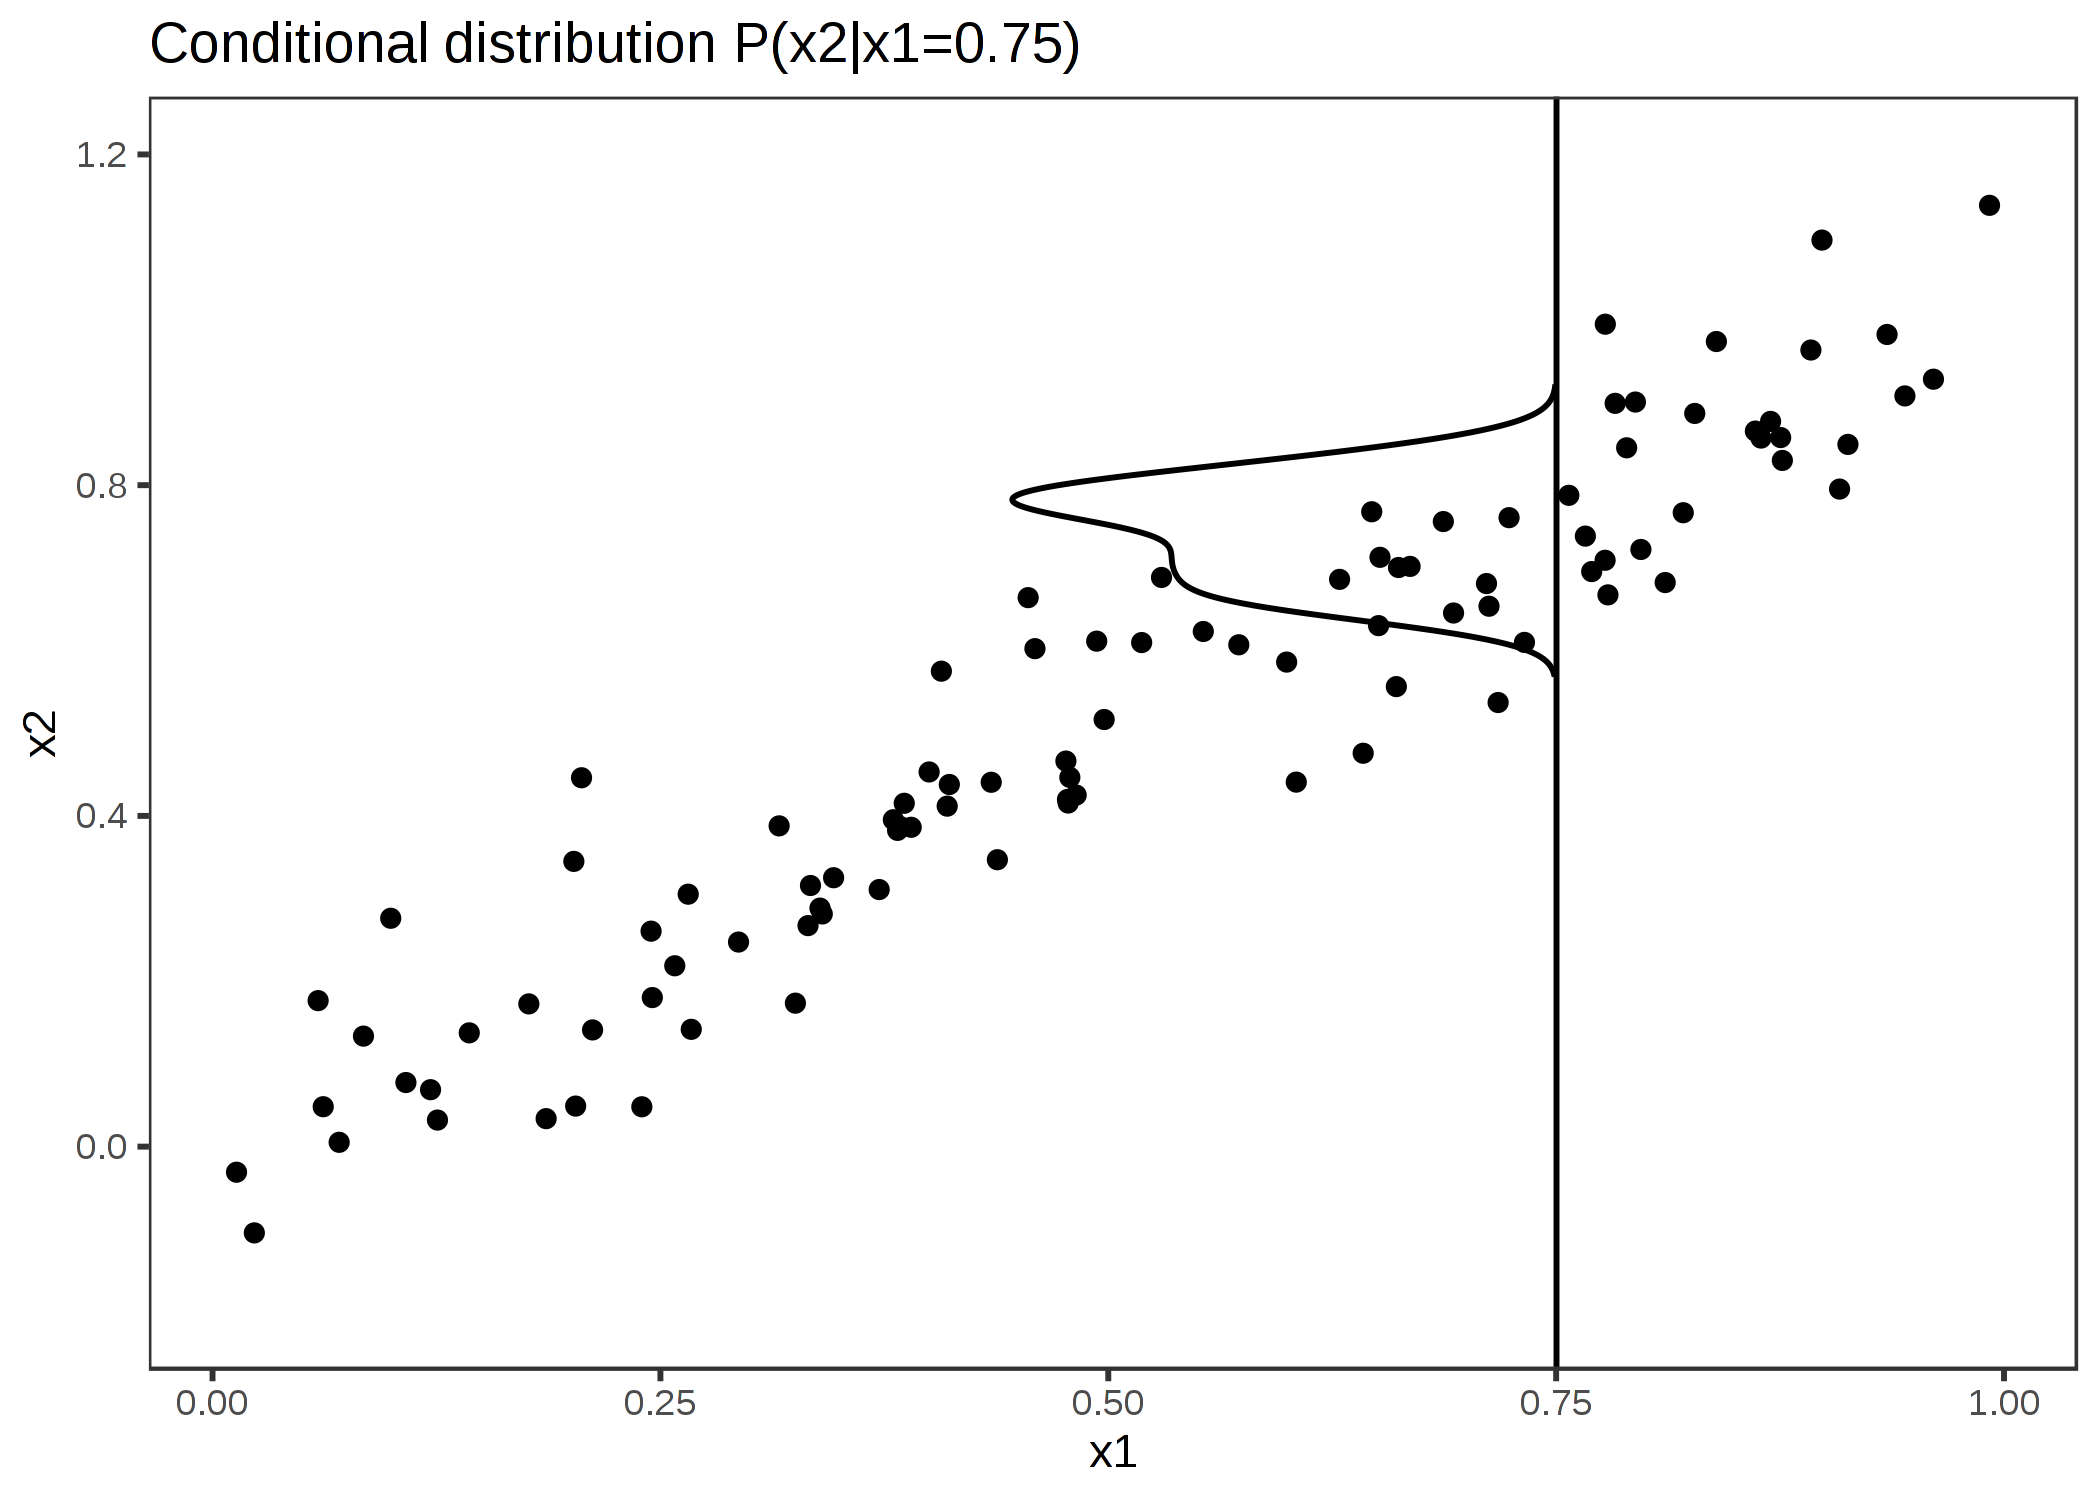 Strongly correlated features x1 and x2. M-Plots average over the conditional distribution. Here the conditional distribution of x2 at x1 = 0.75. Averaging the local predictions leads to mixing the effects of both features.